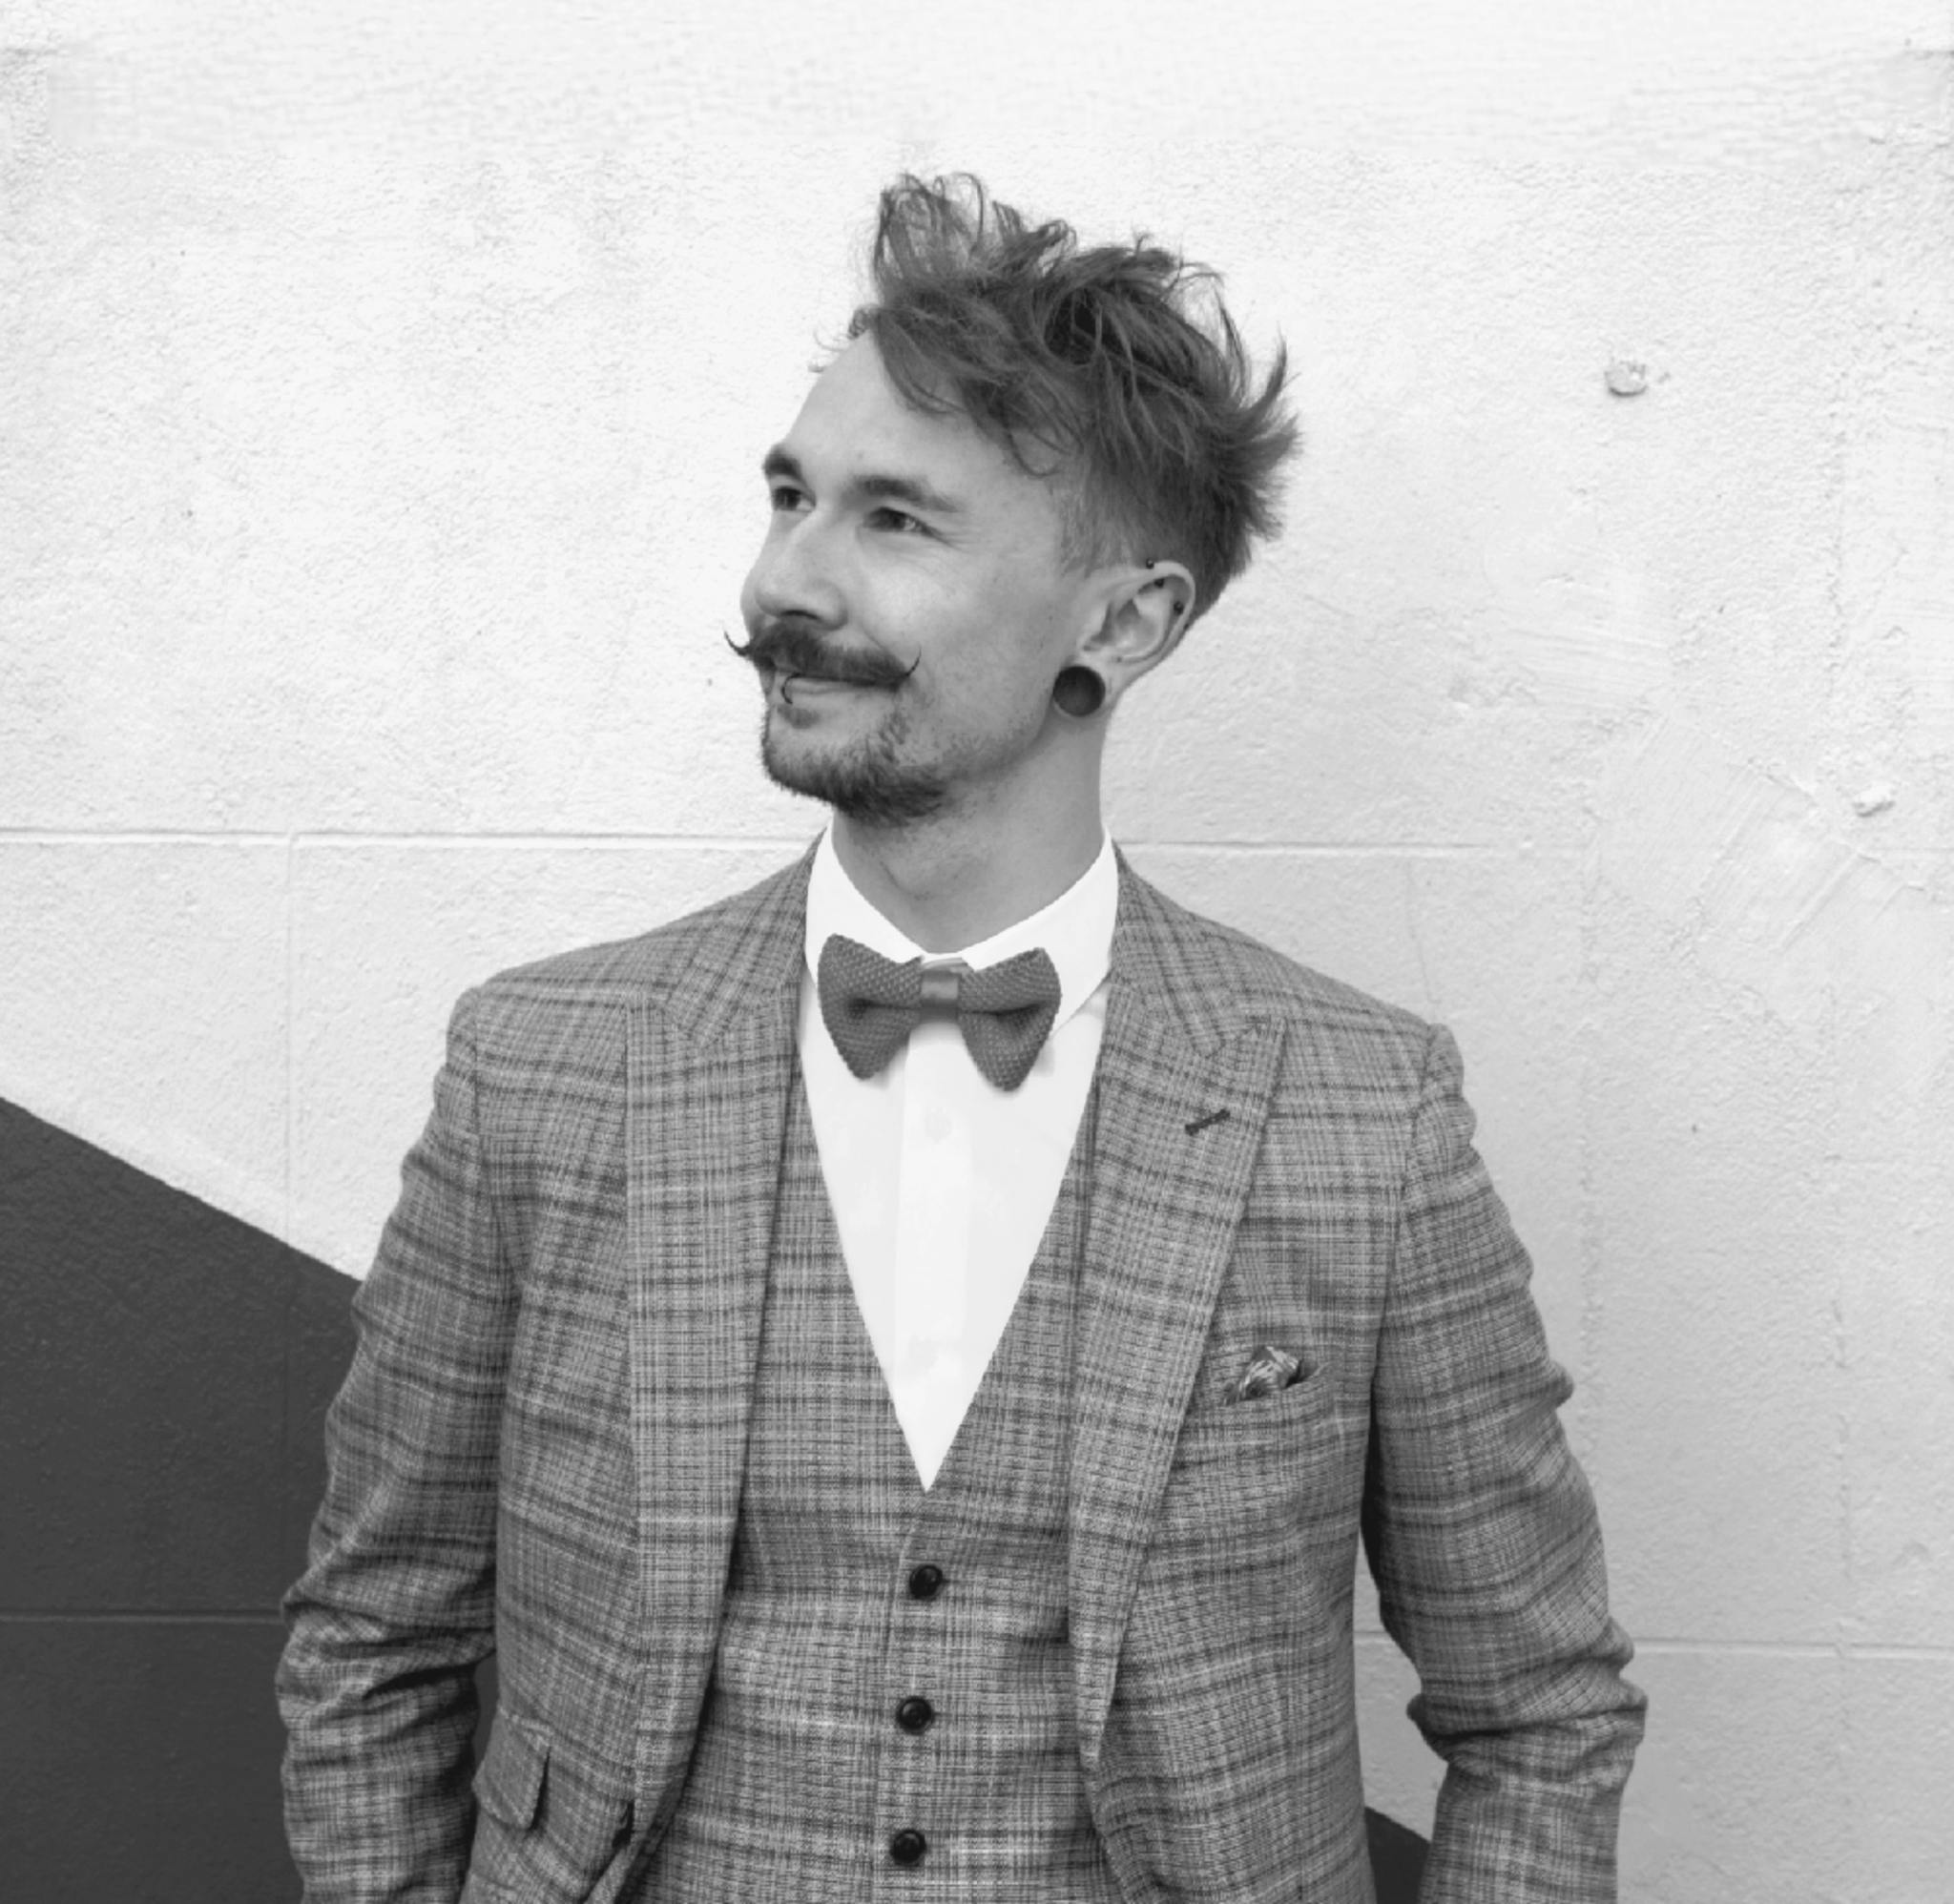 Jack in a waistcoat and suit looking to the side with a moustache and a bowtie